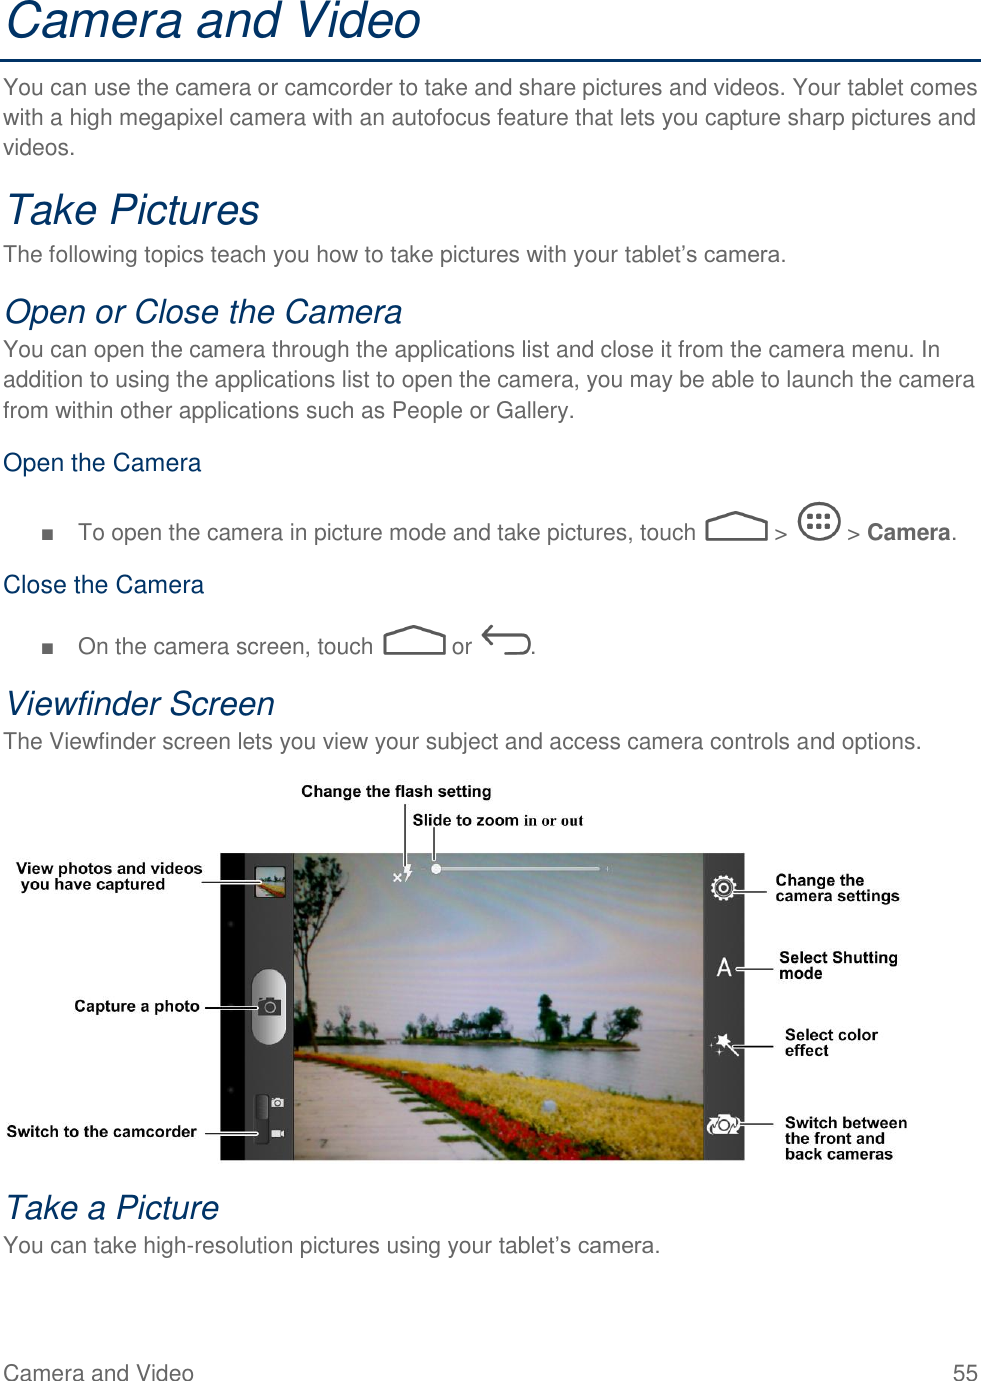  Camera and Video  55 Camera and Video You can use the camera or camcorder to take and share pictures and videos. Your tablet comes with a high megapixel camera with an autofocus feature that lets you capture sharp pictures and videos. Take Pictures The following topics teach you how to take pictures with your tablet’s camera. Open or Close the Camera You can open the camera through the applications list and close it from the camera menu. In addition to using the applications list to open the camera, you may be able to launch the camera from within other applications such as People or Gallery. Open the Camera ■  To open the camera in picture mode and take pictures, touch   &gt;   &gt; Camera. Close the Camera ■  On the camera screen, touch   or  . Viewfinder Screen The Viewfinder screen lets you view your subject and access camera controls and options.  Take a Picture You can take high-resolution pictures using your tablet’s camera. 